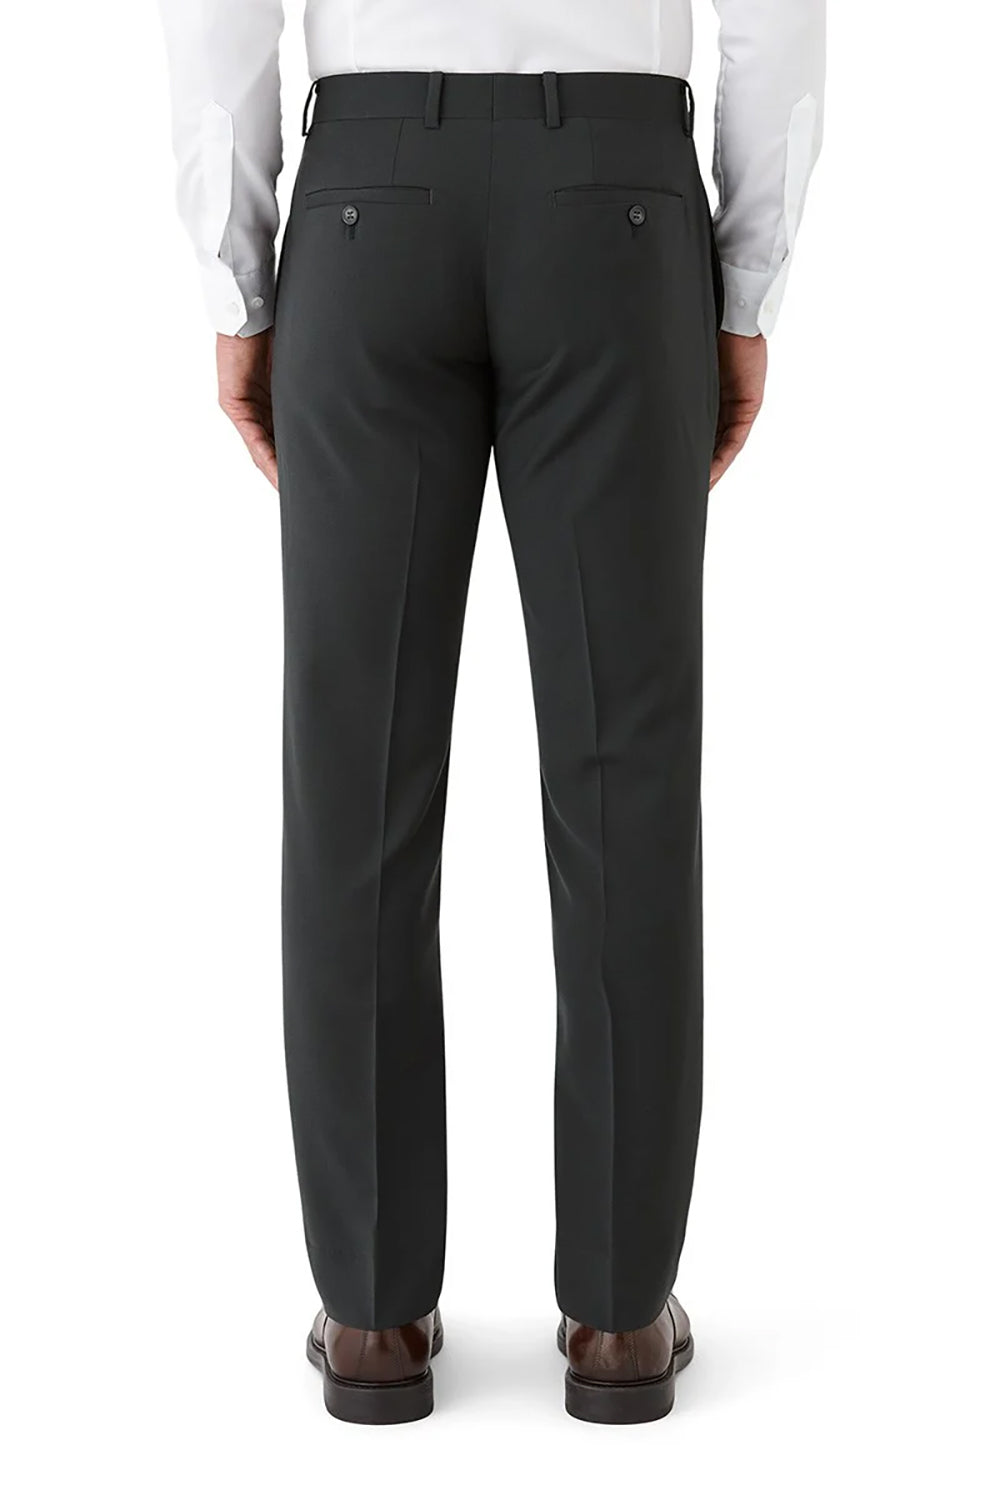 GIBSON CAPER WOOL STRETCH FLAT FRONT SUIT TROUSER FGR605